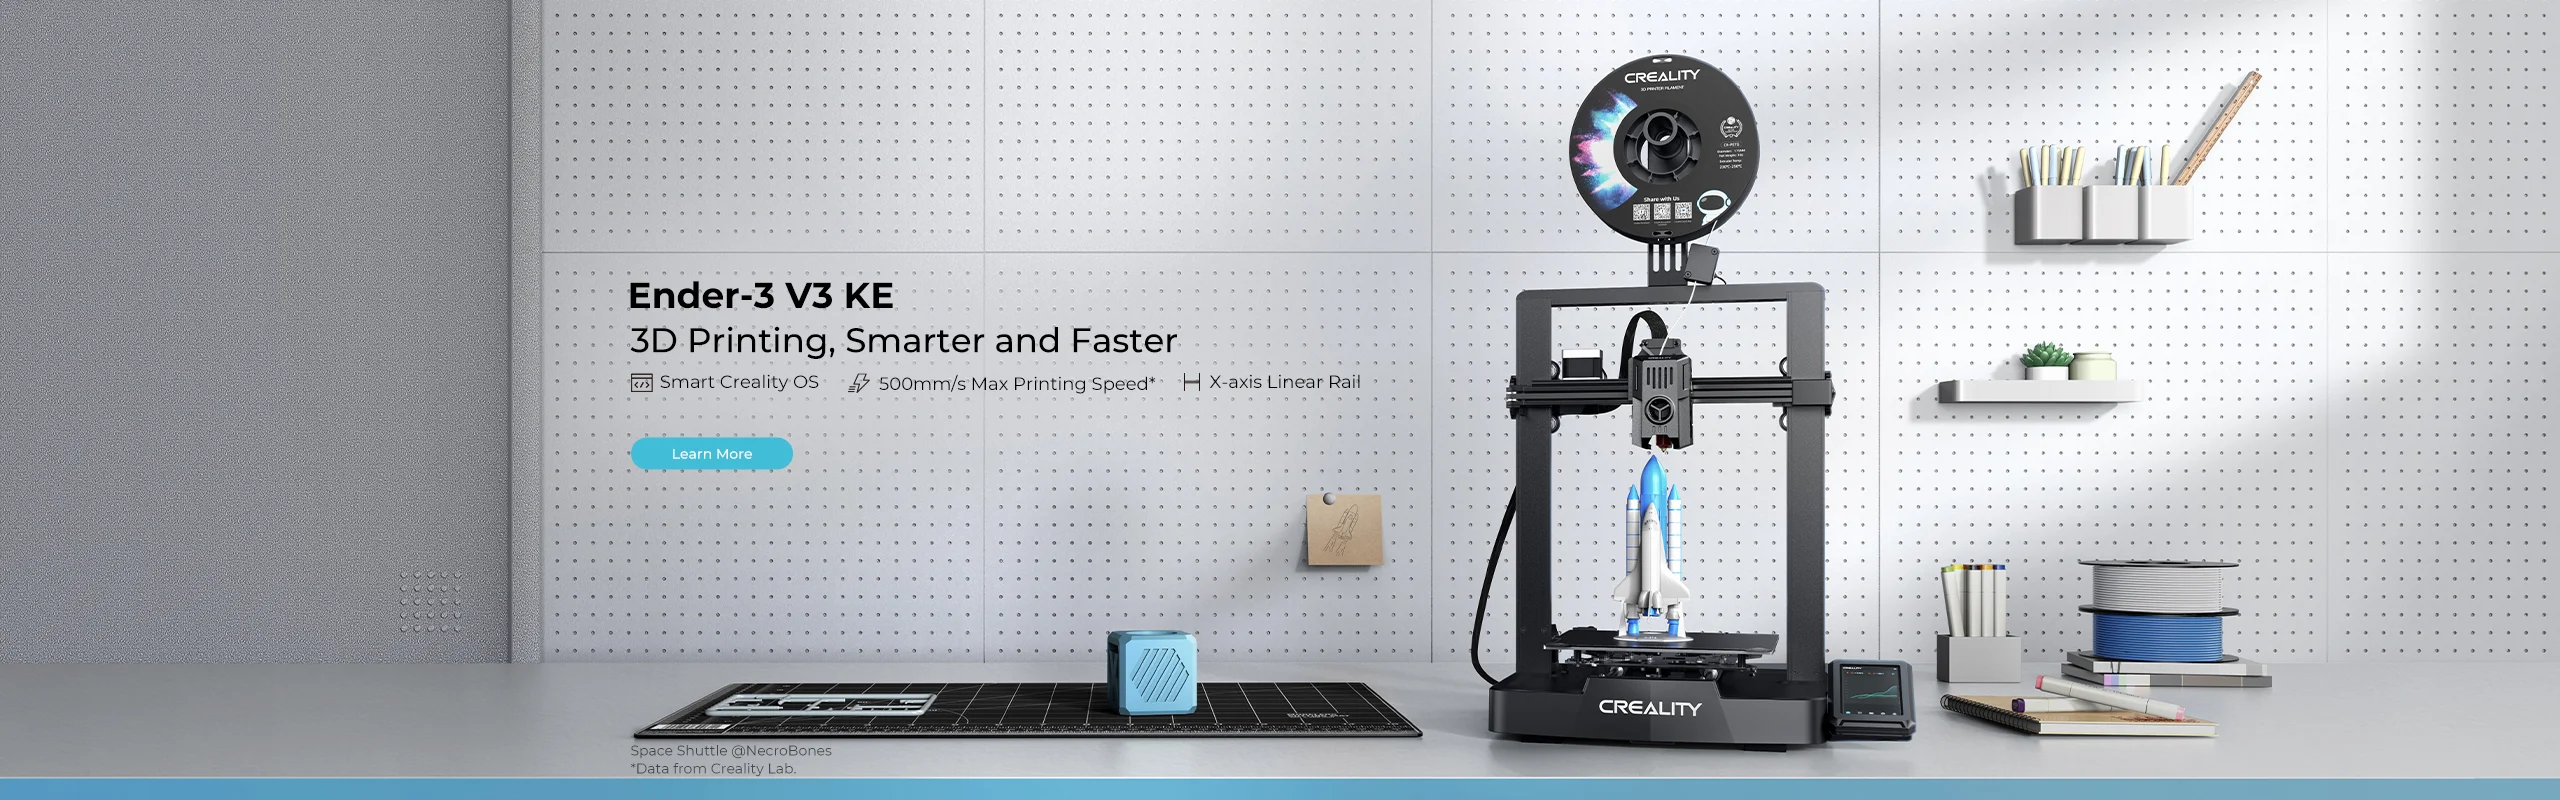 Creality - Global Leader in Consumer-Level 3D Printer Ecosystems and Creator